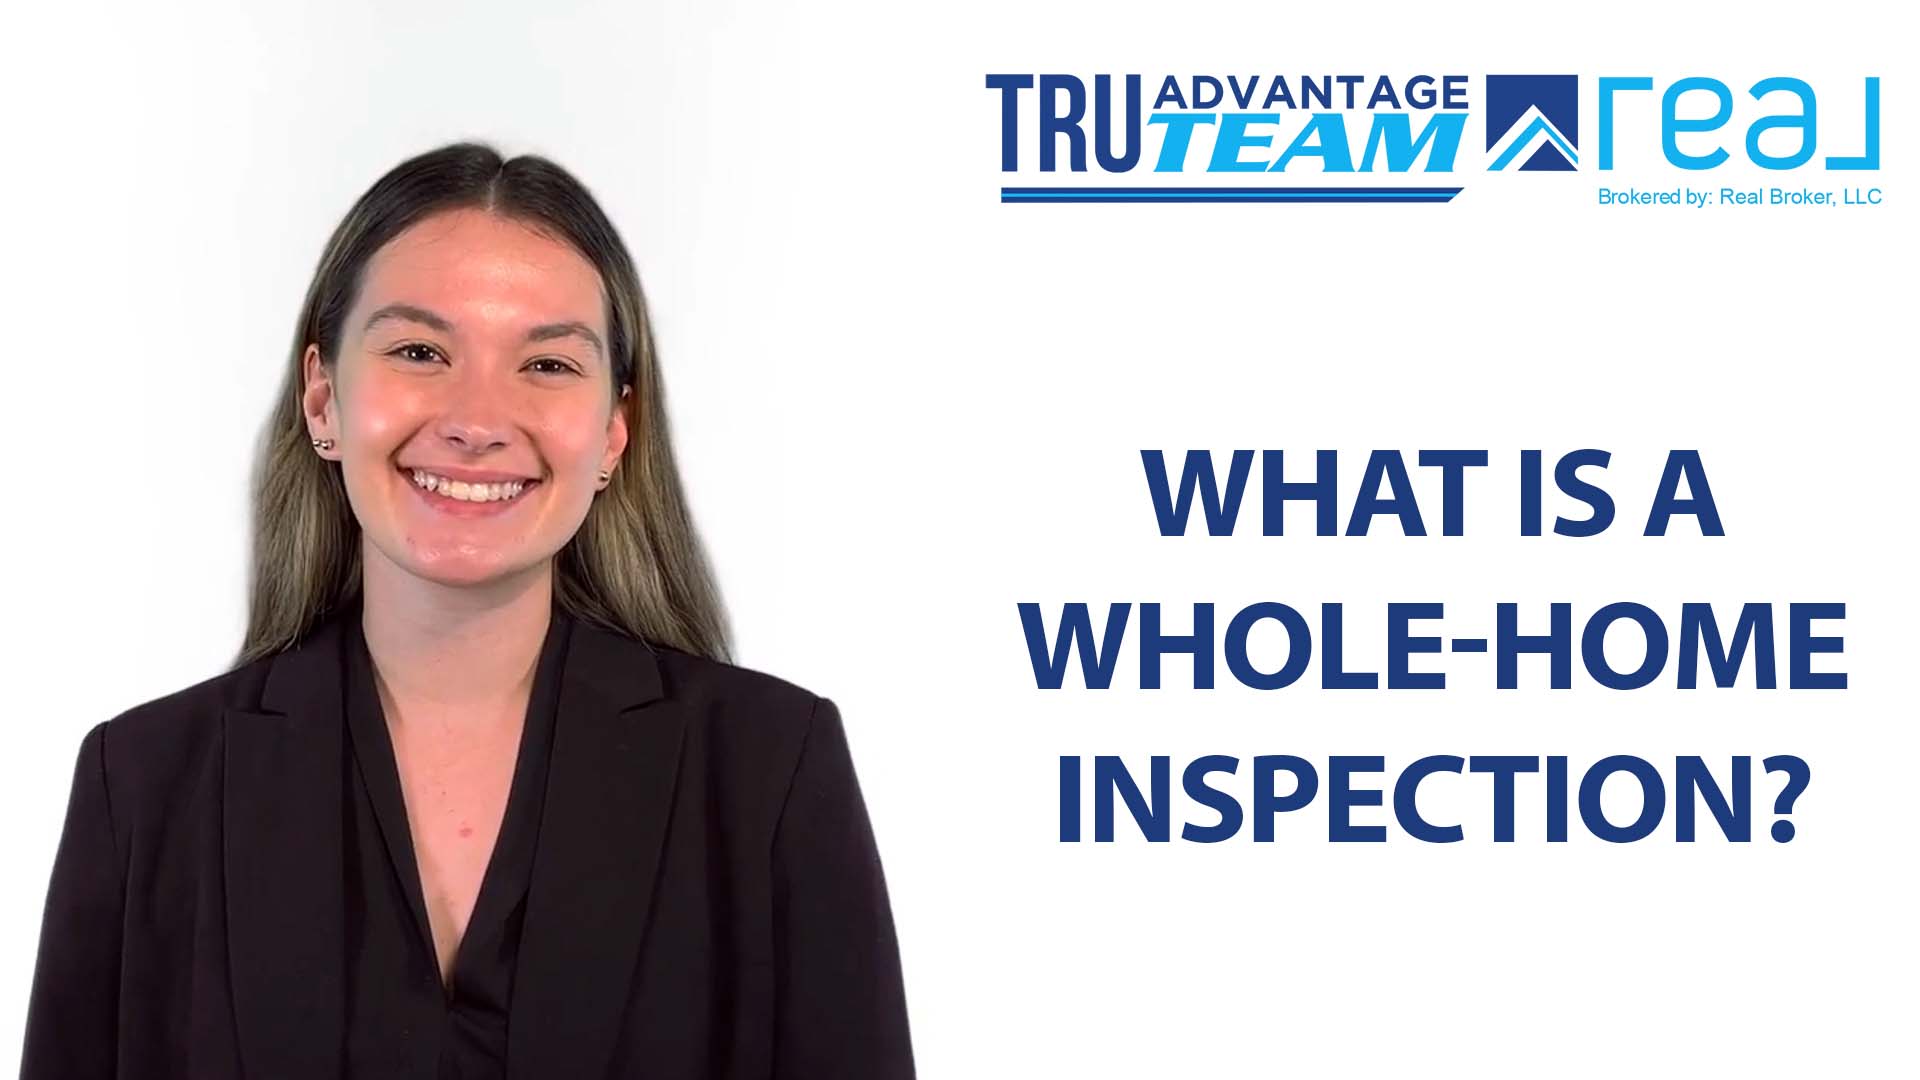 What You Need To Know About Whole-Home Inspections